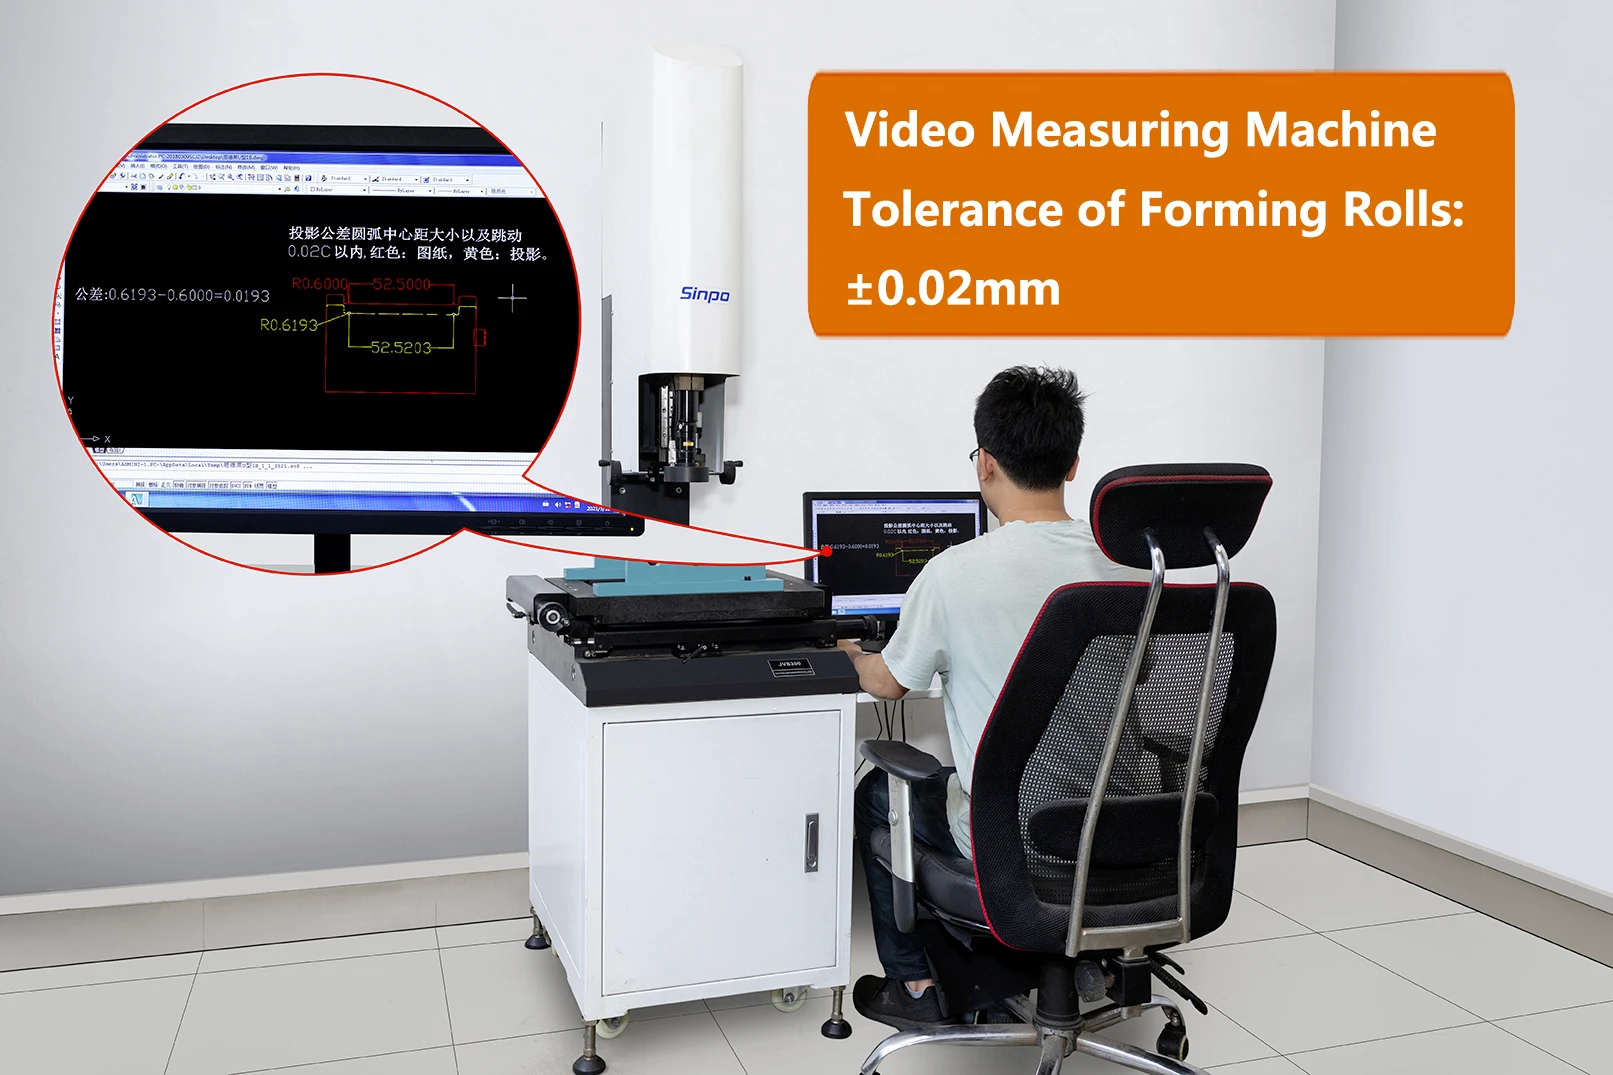 Video Measuring Machine Tolerance of Forming Rolls: +0.02mm